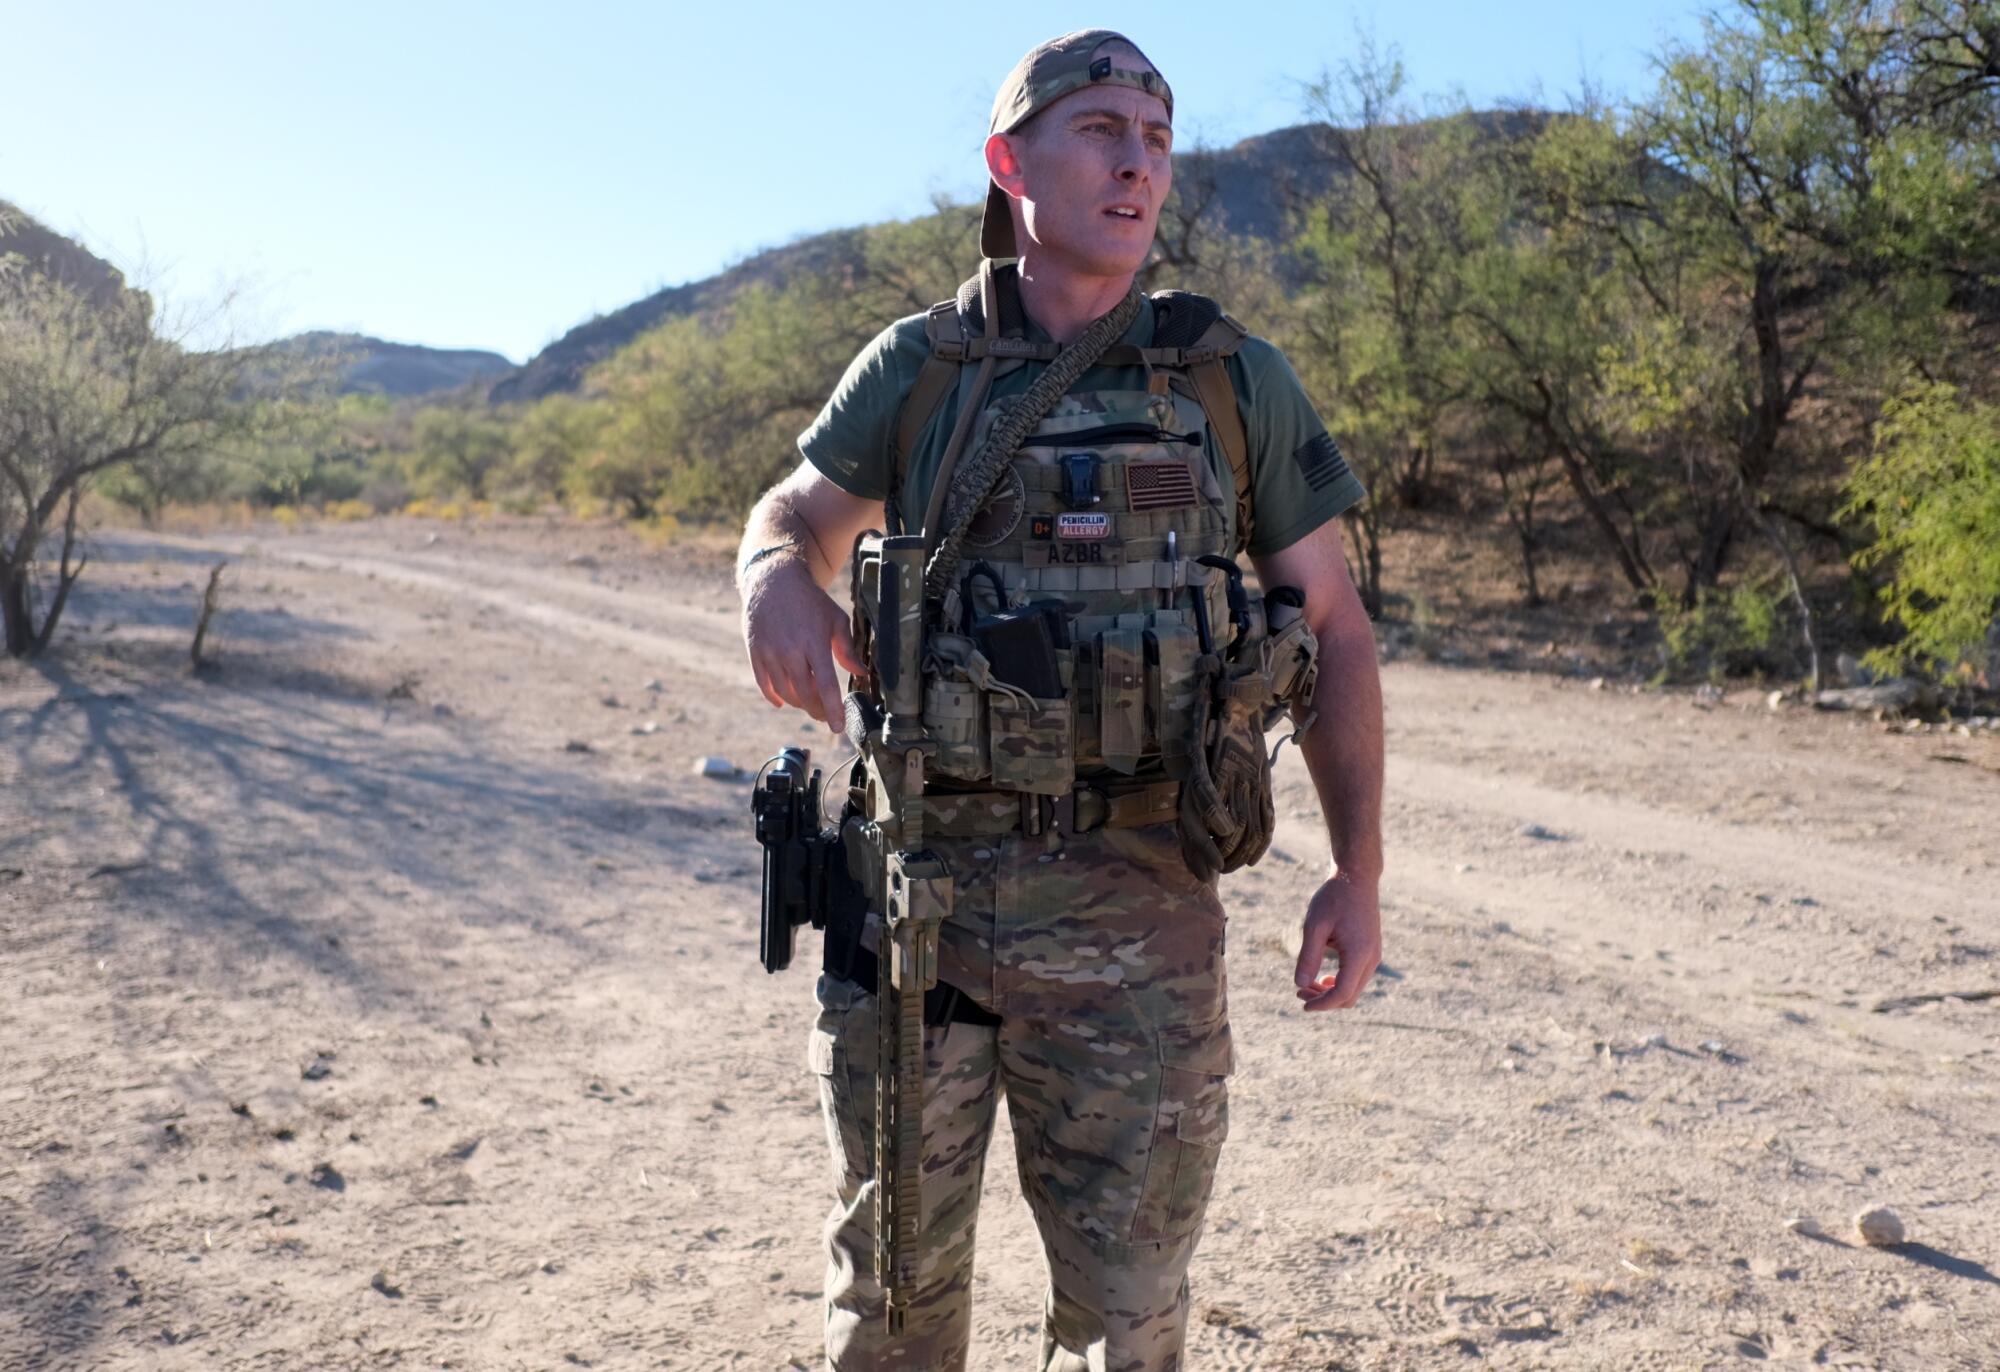 A man wearing camoflage and carring a rifle stands in a desert 